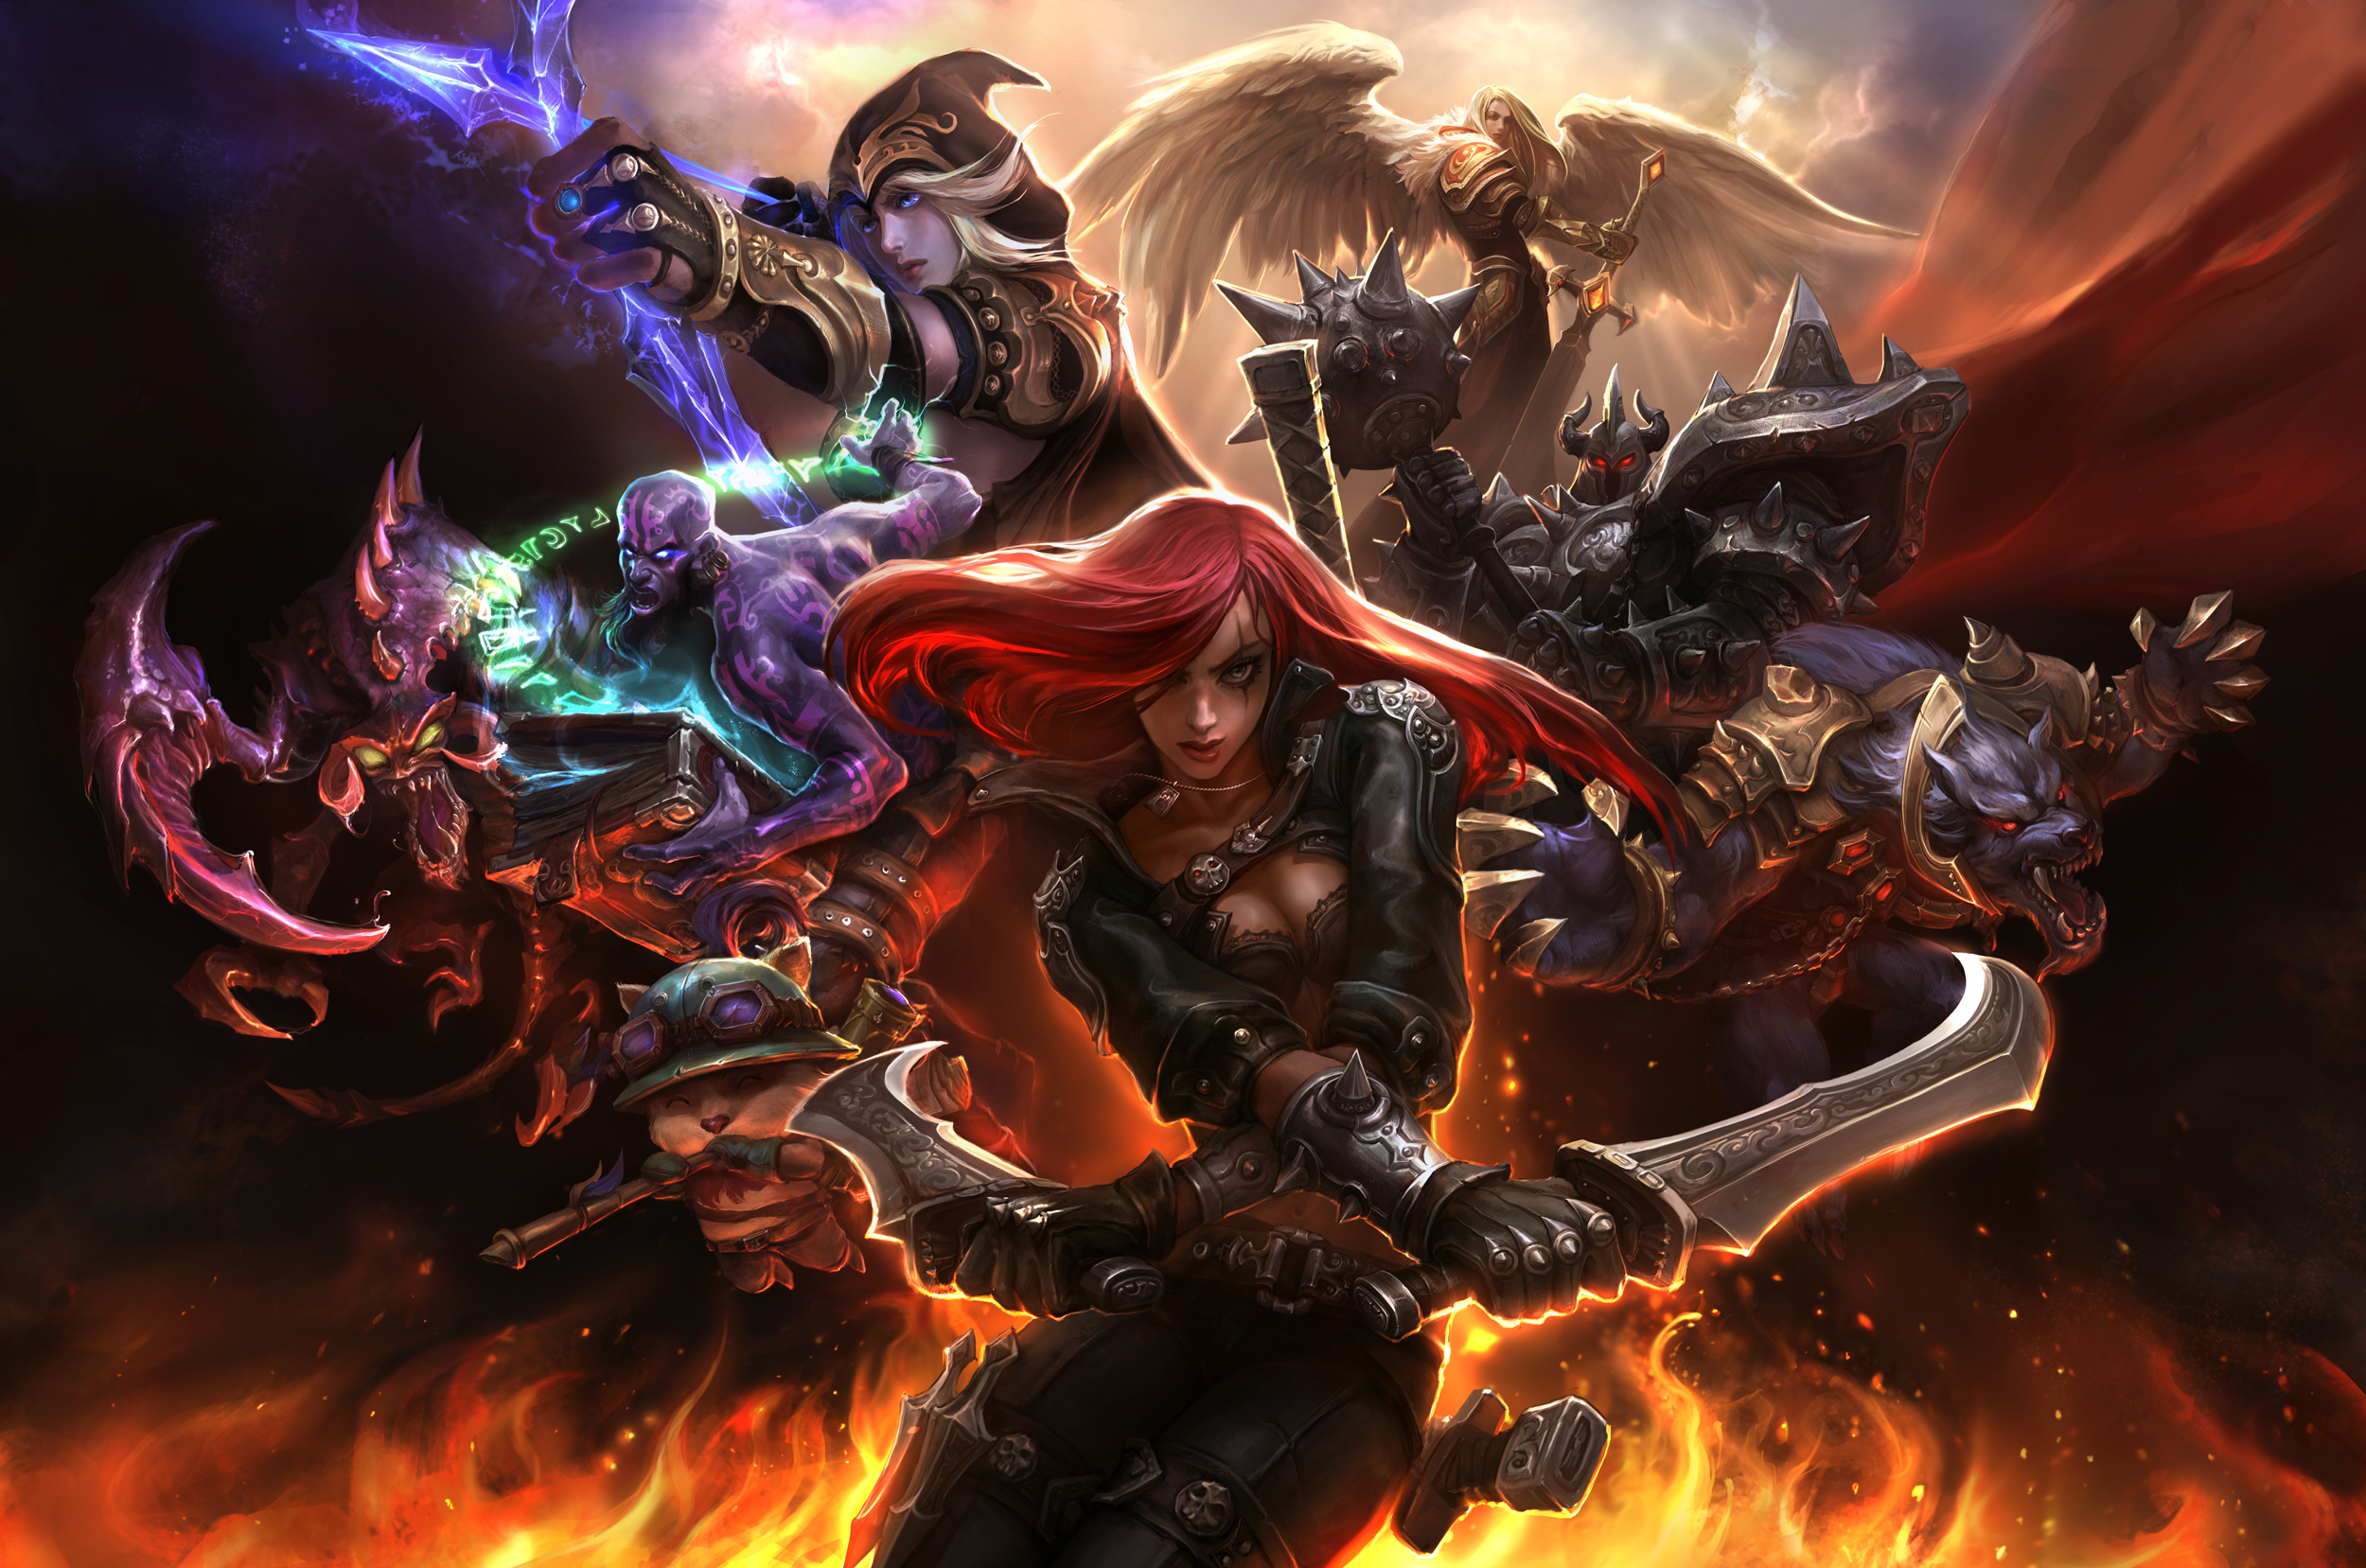 video game, league of legends, ashe (league of legends), cho'gath (league of legends), katarina (league of legends), kayle (league of legends), mordekaiser (league of legends), ryze (league of legends), teemo (league of legends), warwick (league of legends) 4K Ultra